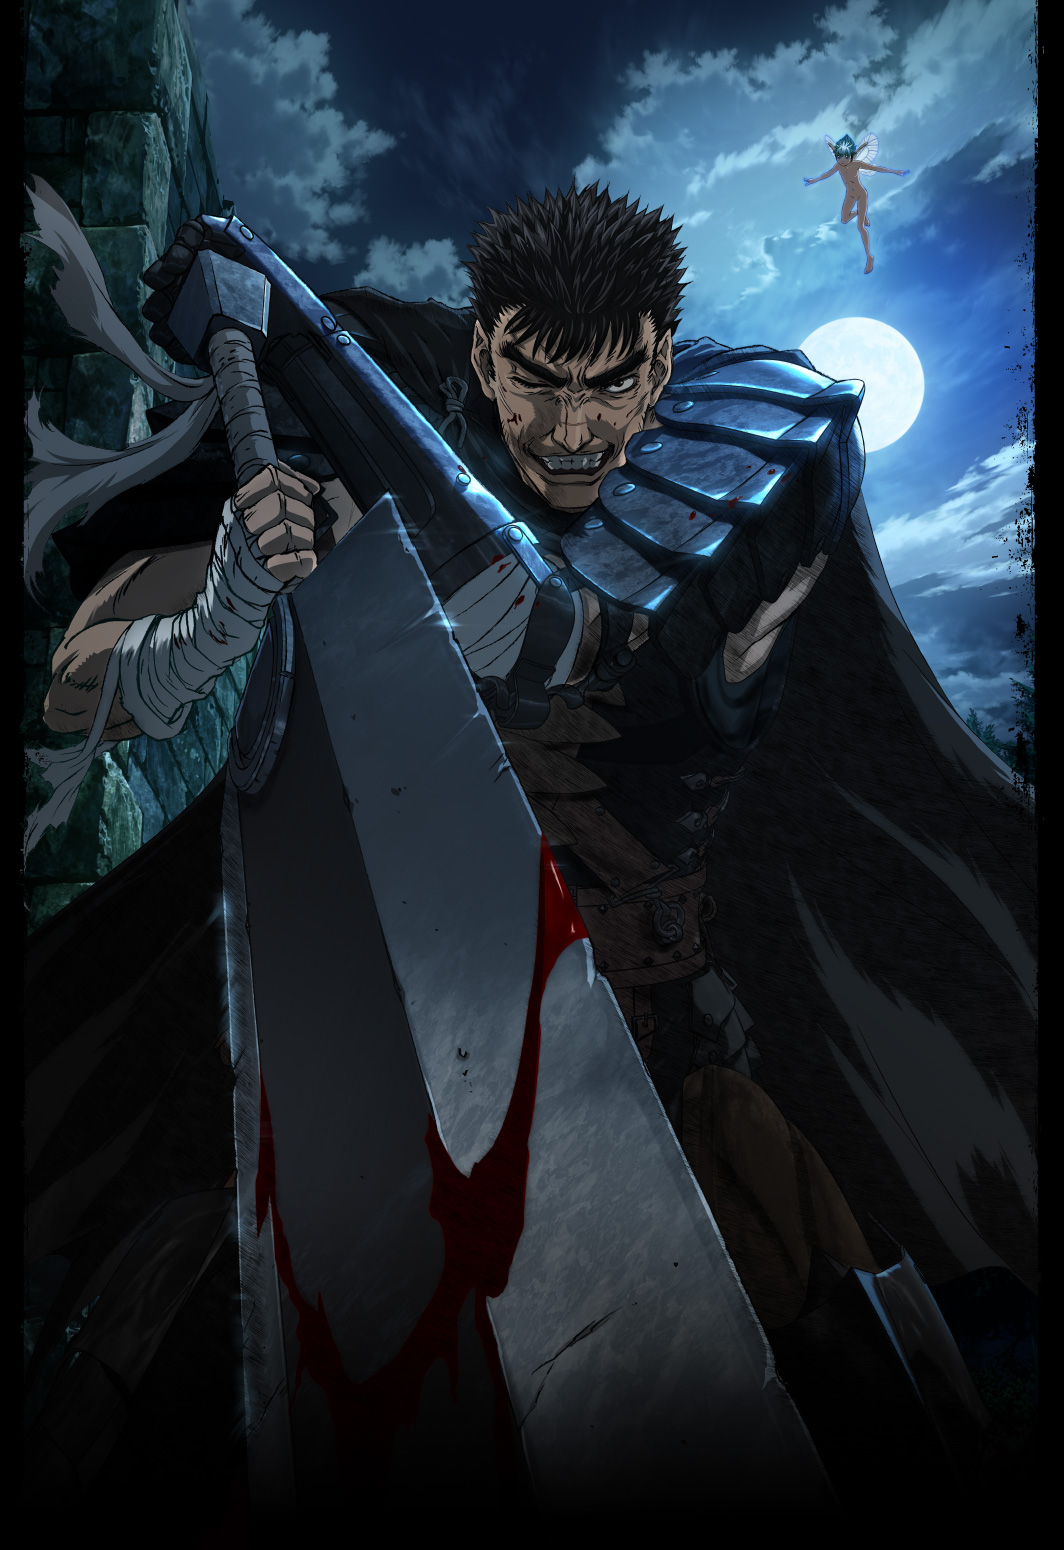 New Berserk anime showing greater promise than 90s version Inquirer 